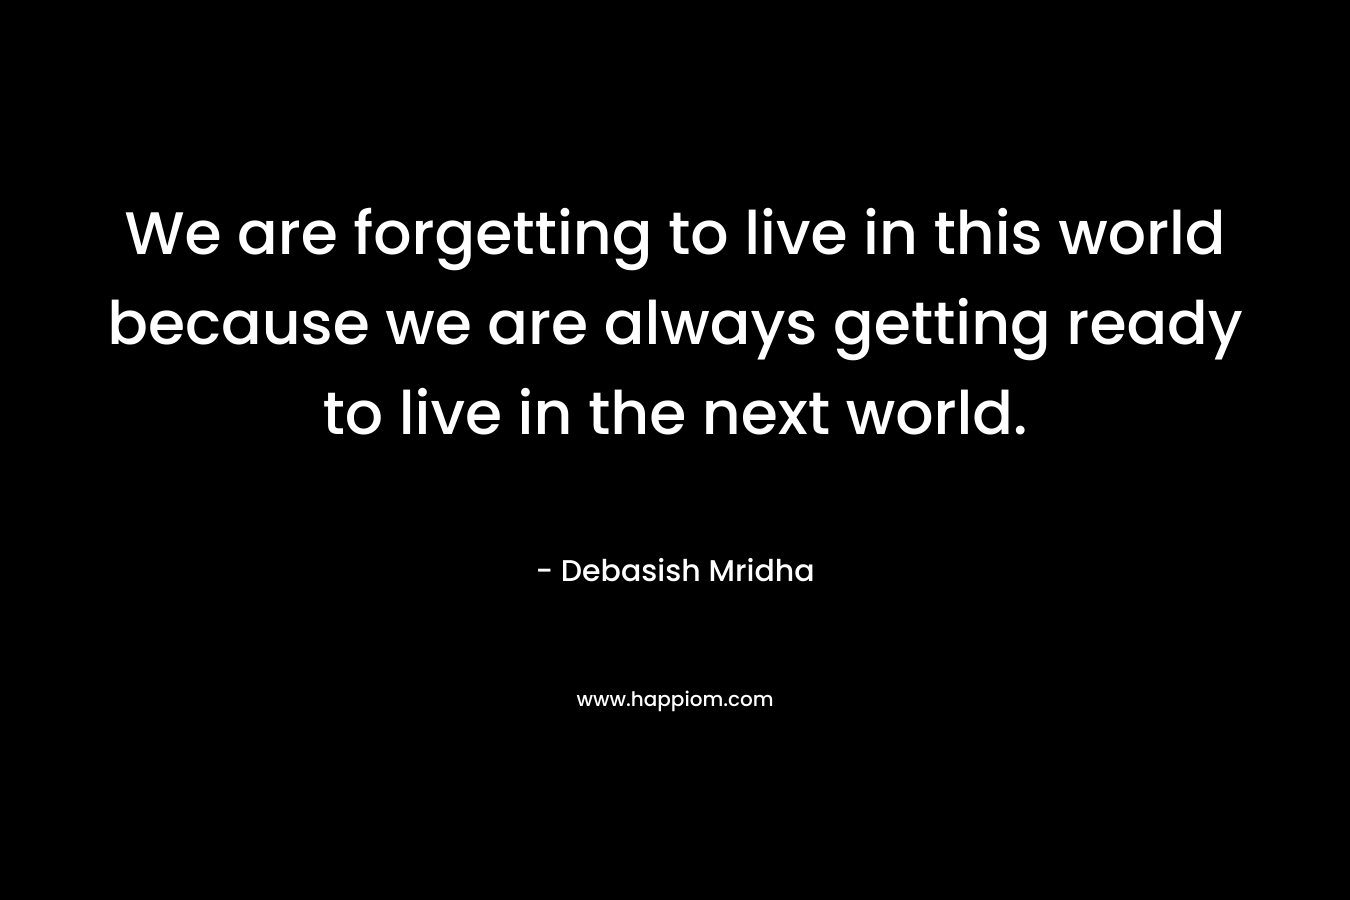 We are forgetting to live in this world because we are always getting ready to live in the next world.